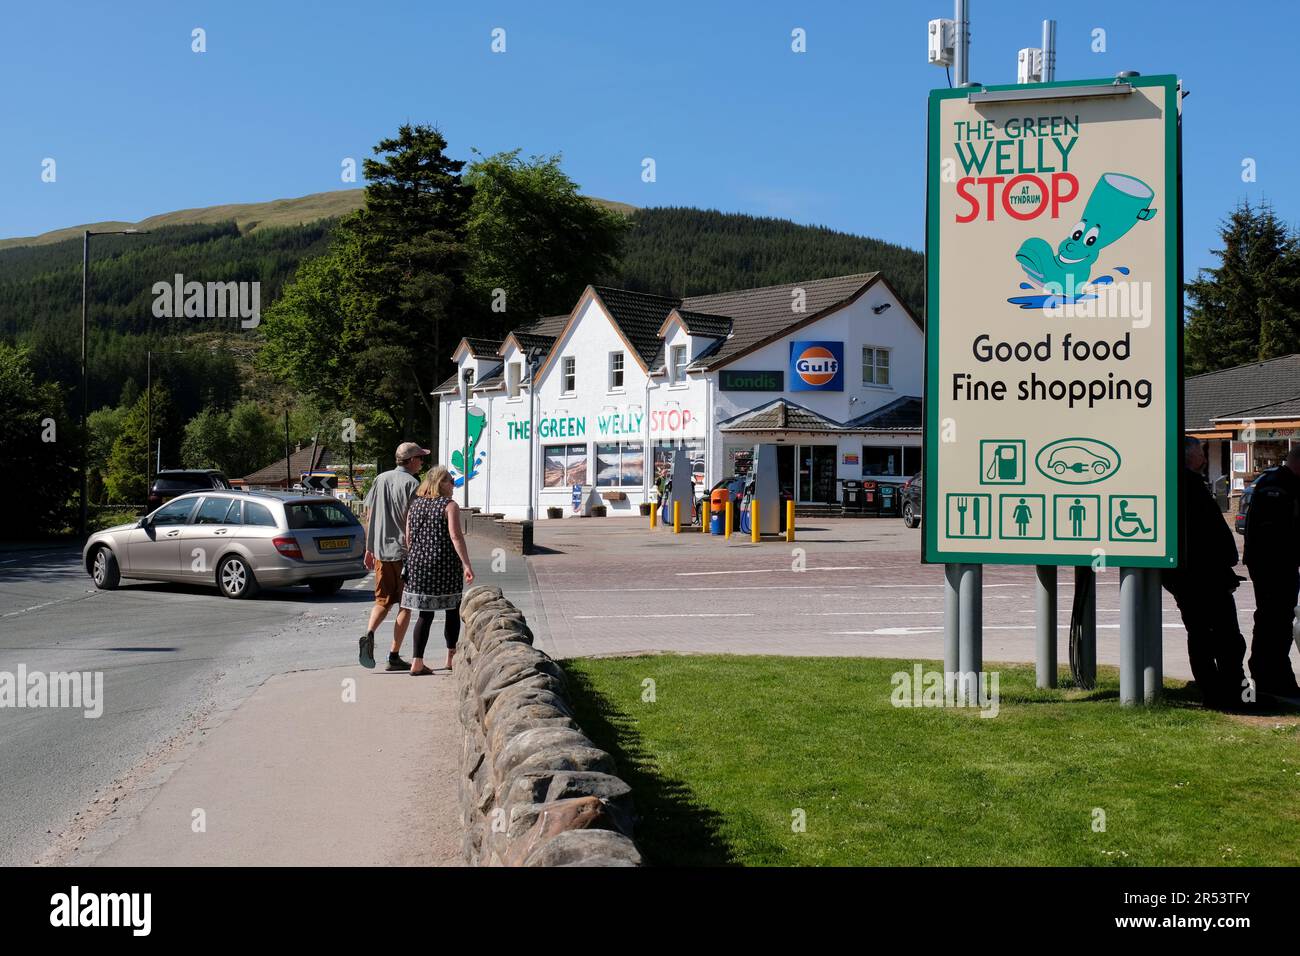 The Green Welly Stop, Tyndrum Scotland Stock Photo